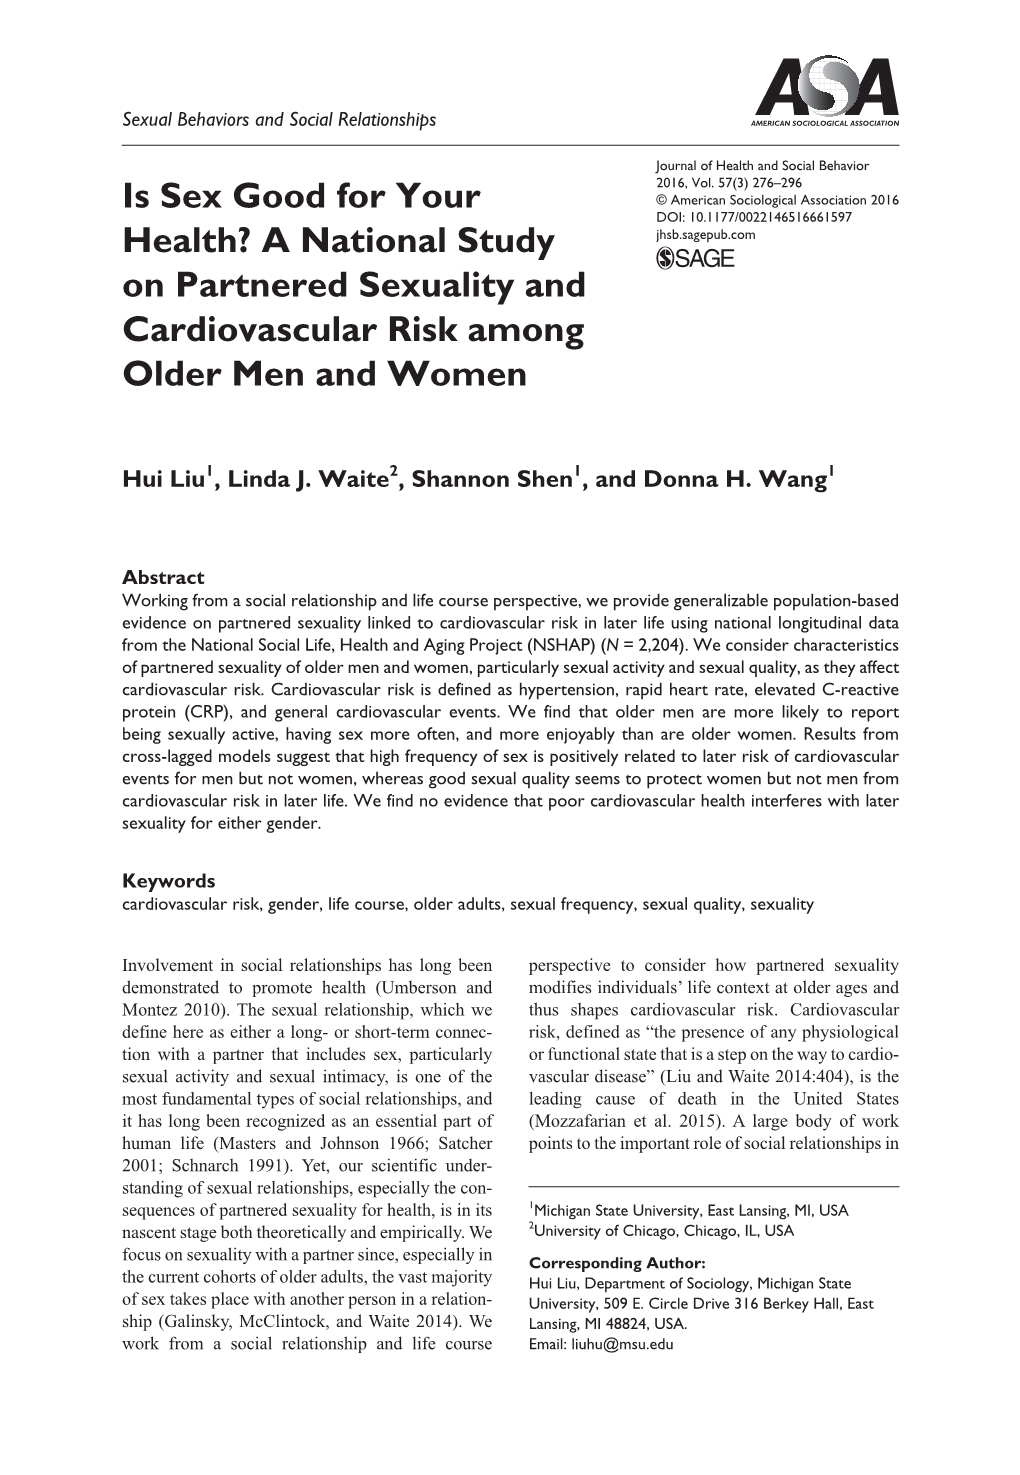 Is Sex Good for Your Health? a National Study on Partnered Sexuality and Cardiovascular Risk Among Older Men and Women